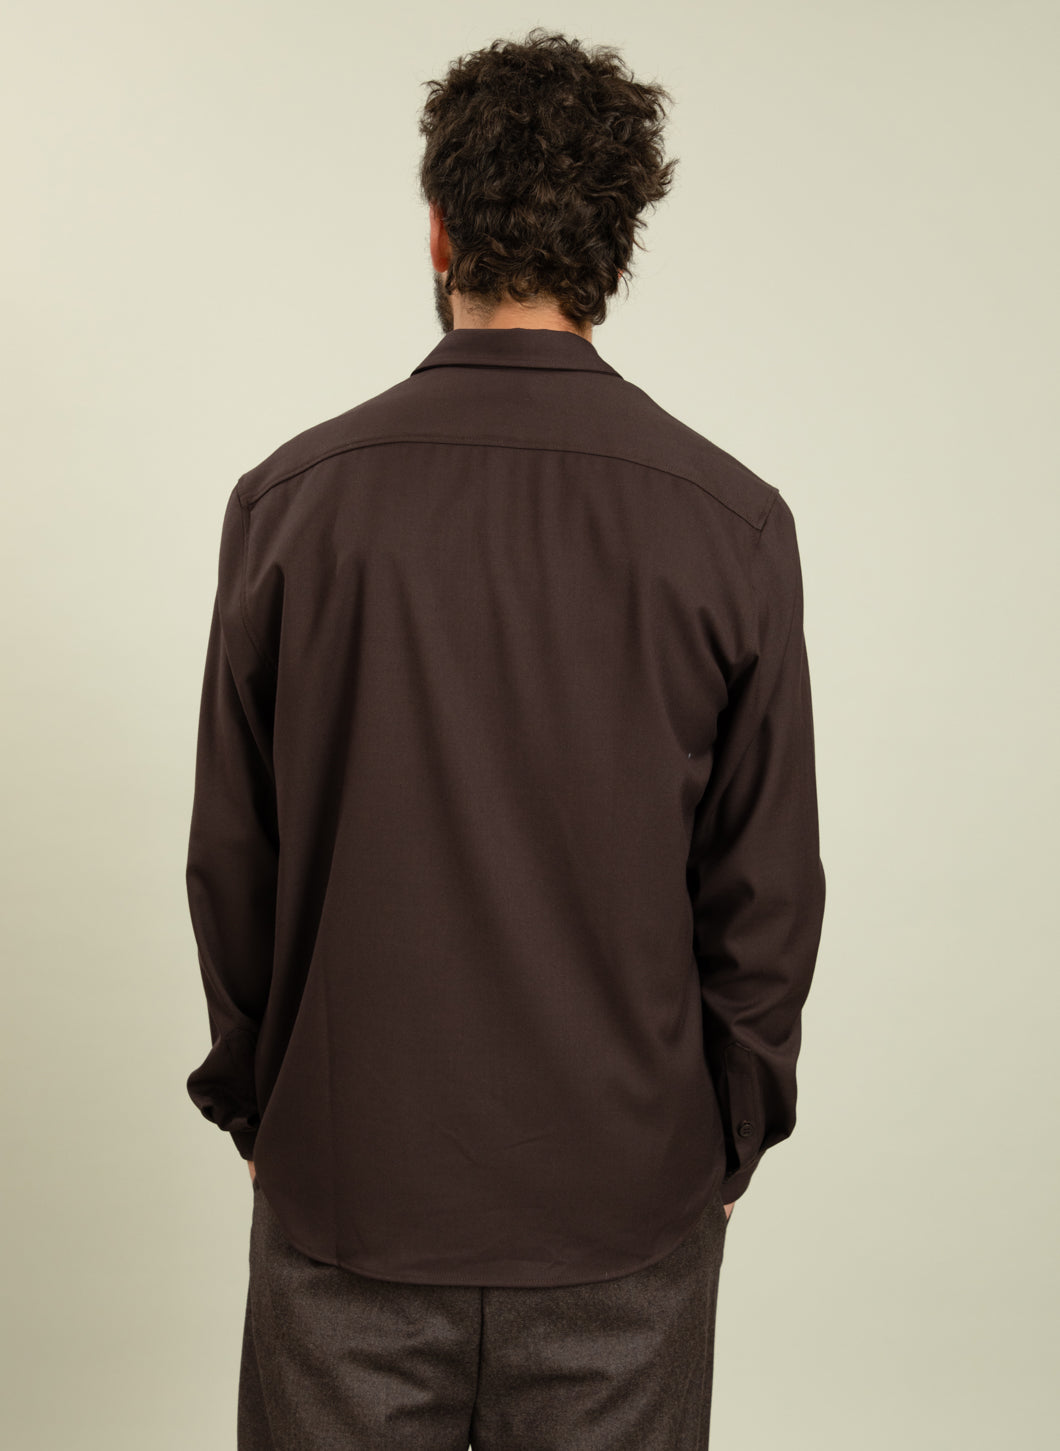 Overshirt with Chest Pocket in Chocolate Serge Fabric